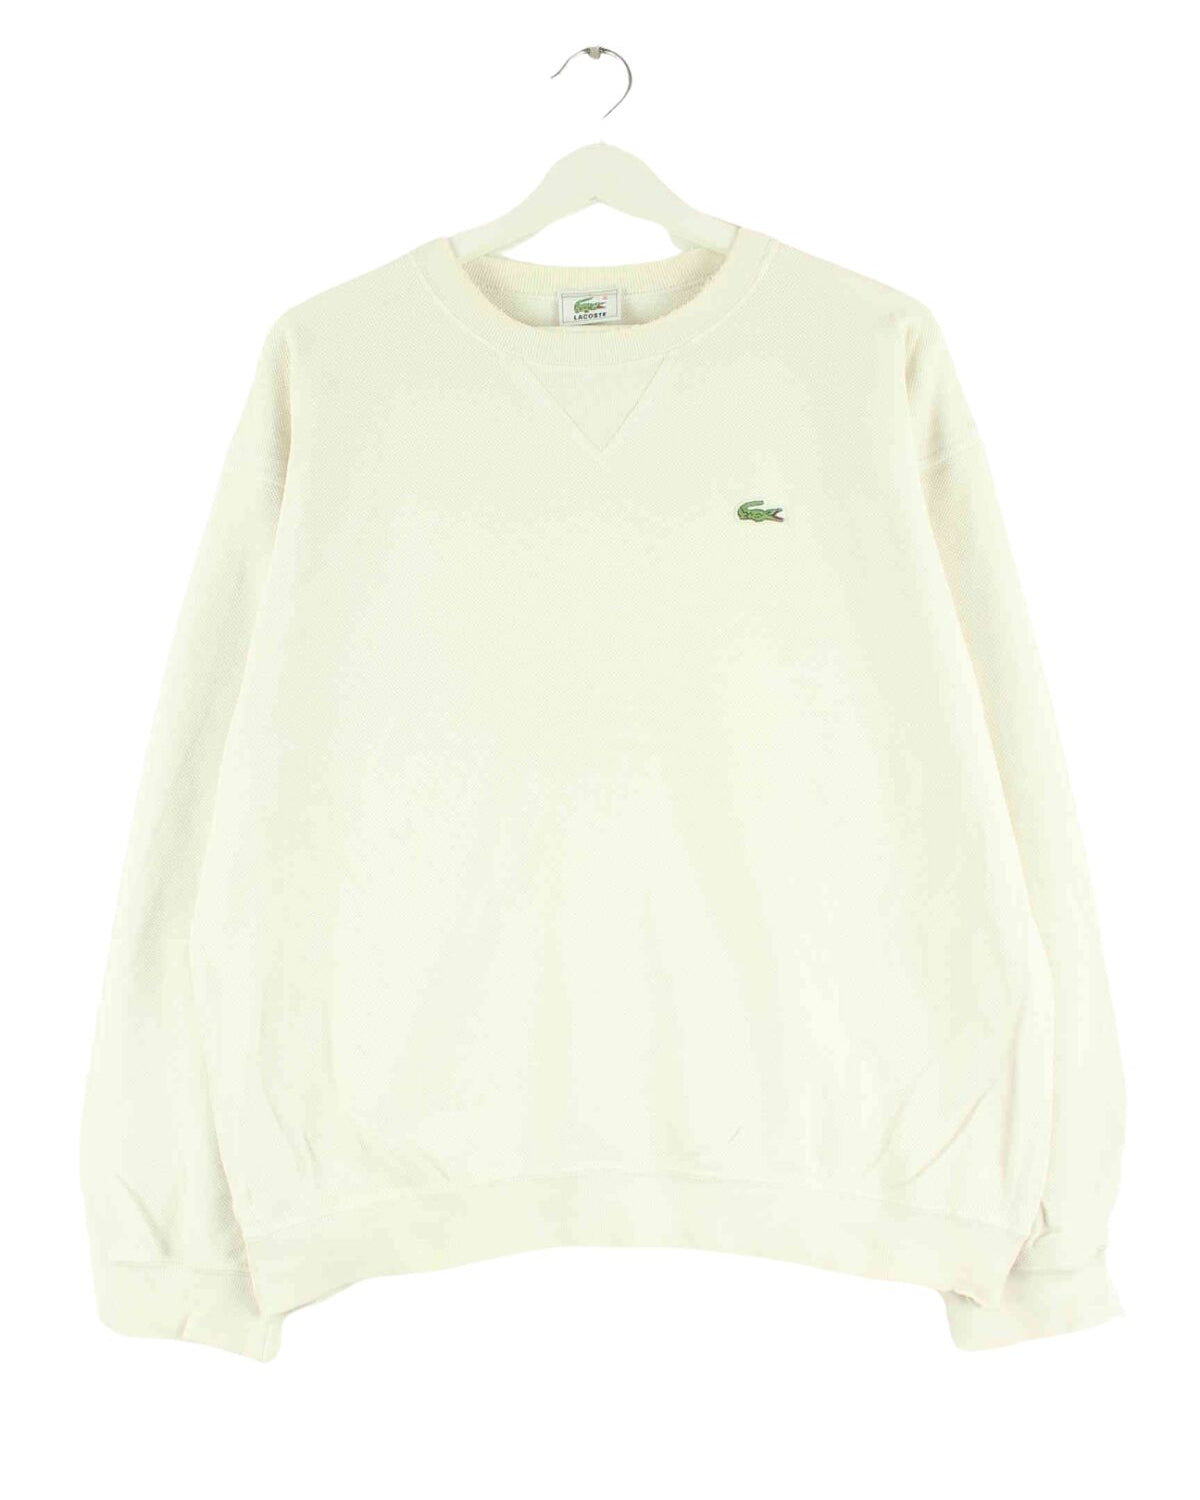 Lacoste Basic Sweater Beige M (front image)